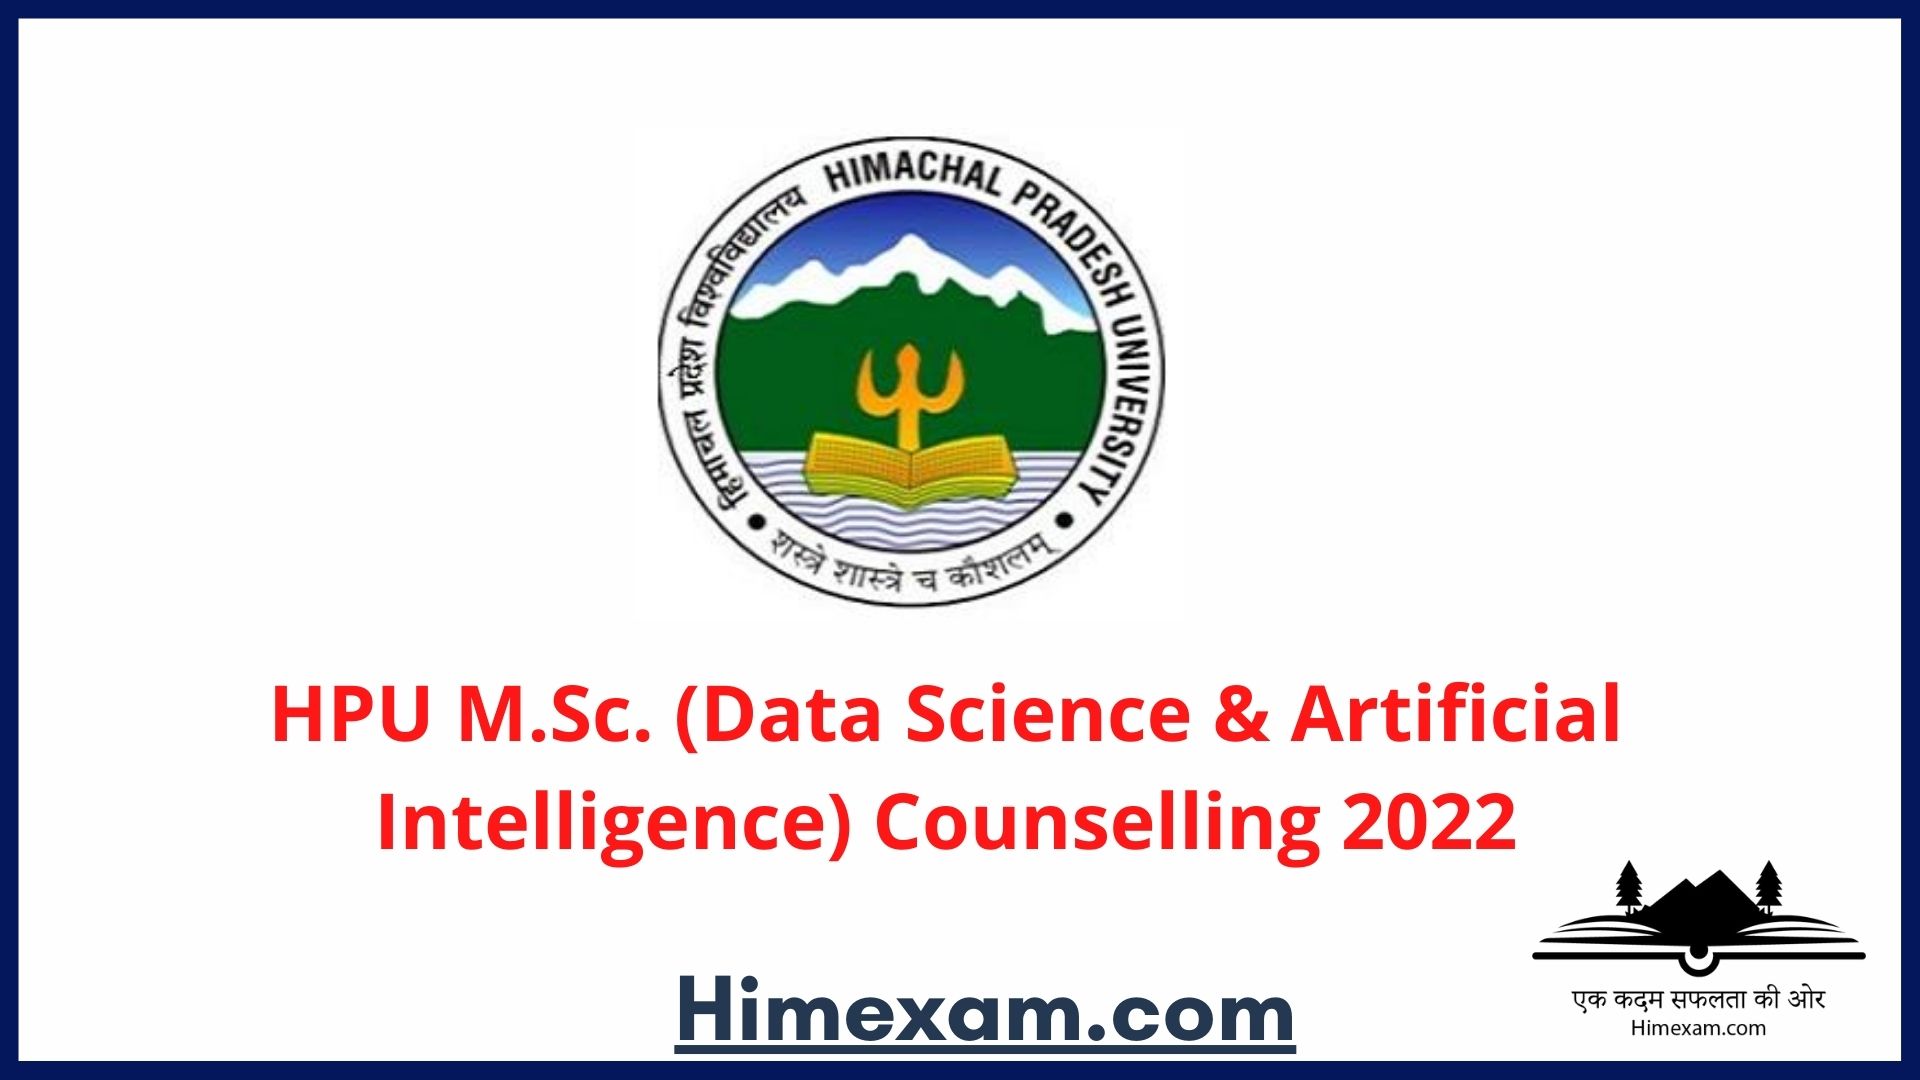 HPU M.Sc. (Data Science & Artificial Intelligence) Counselling 2022